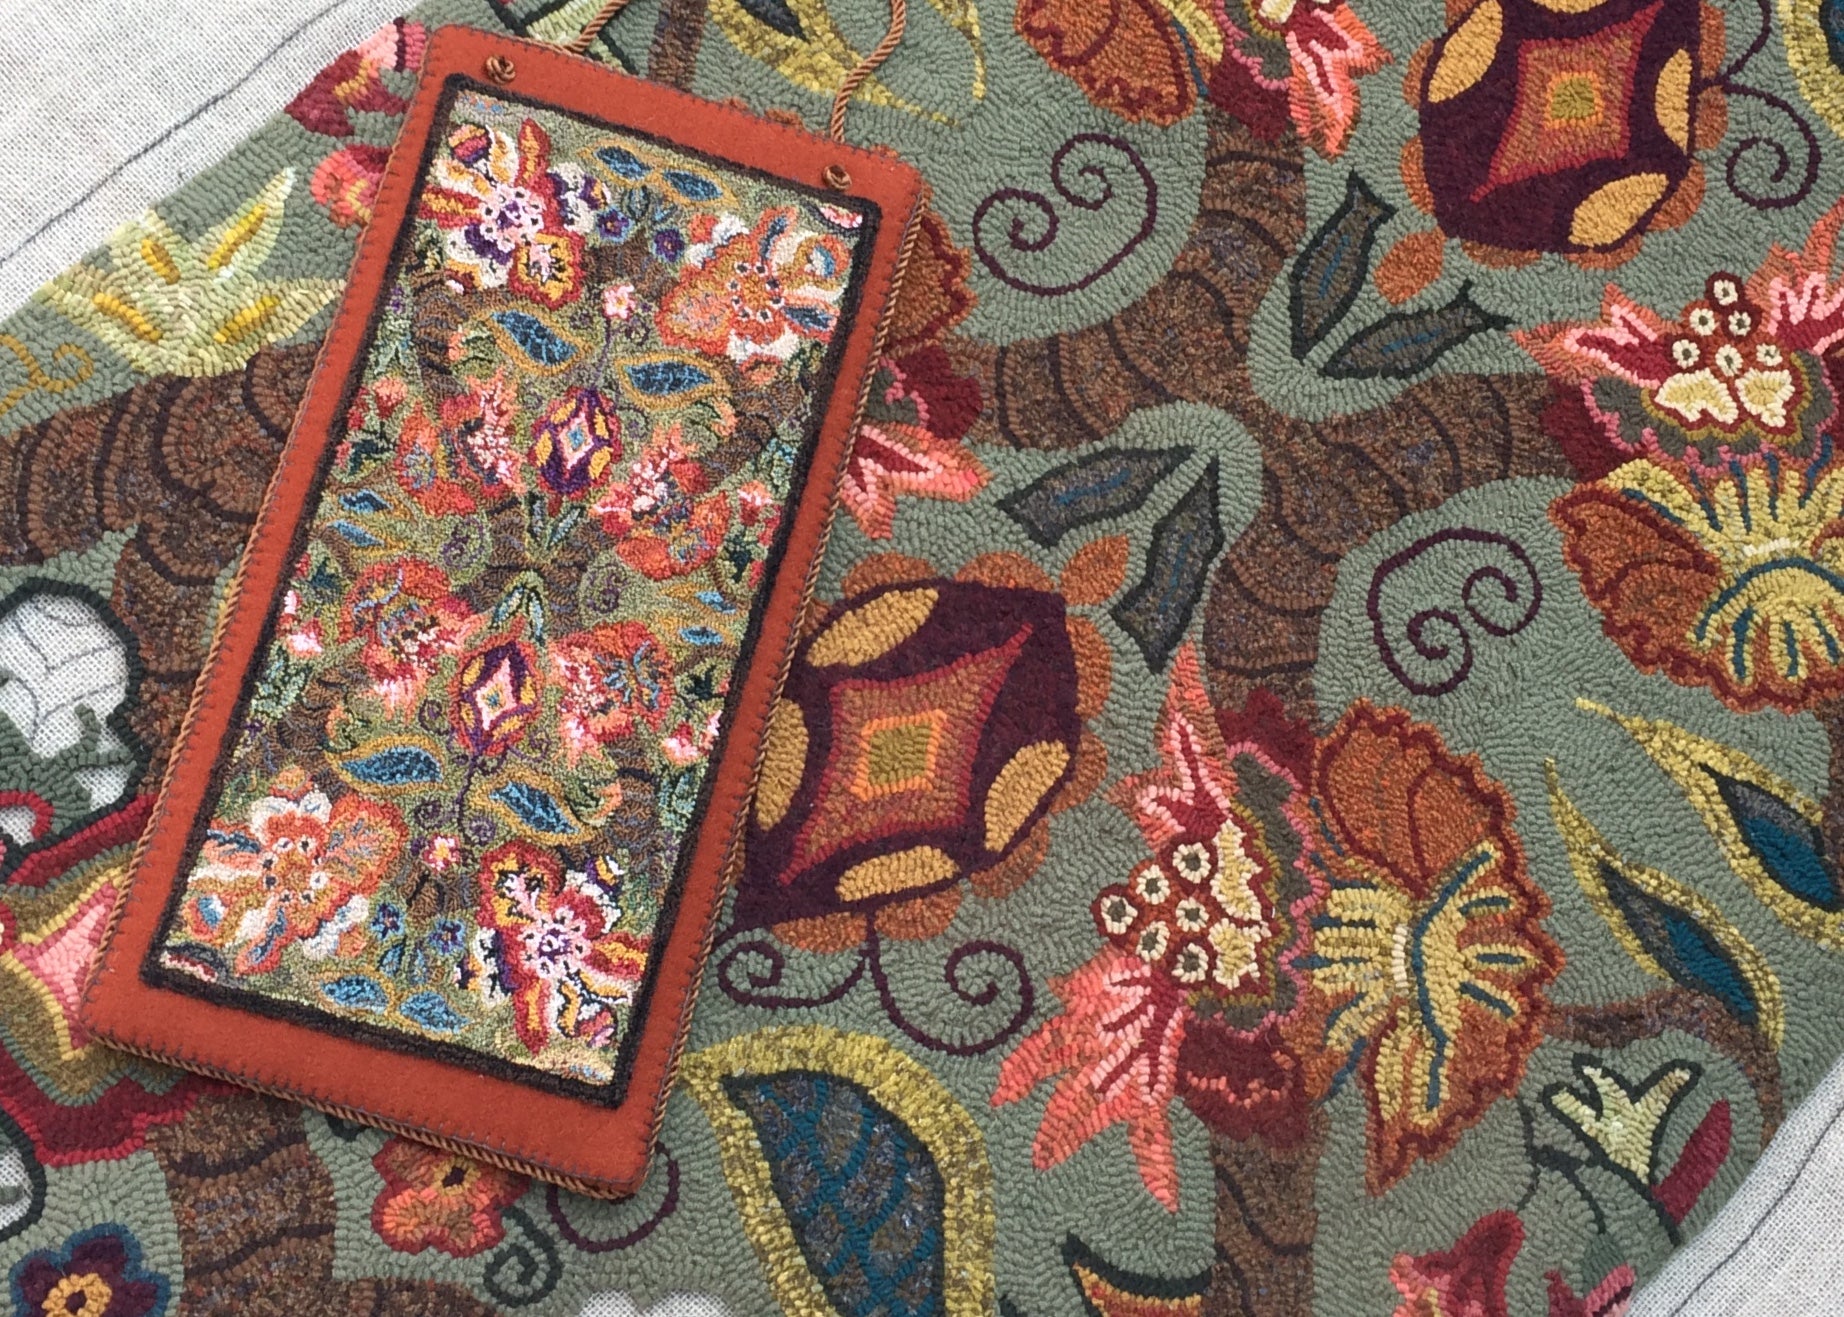 Flourish 3060- Rug Hooking pattern on Linen, Floral Design by Orphaned Wool